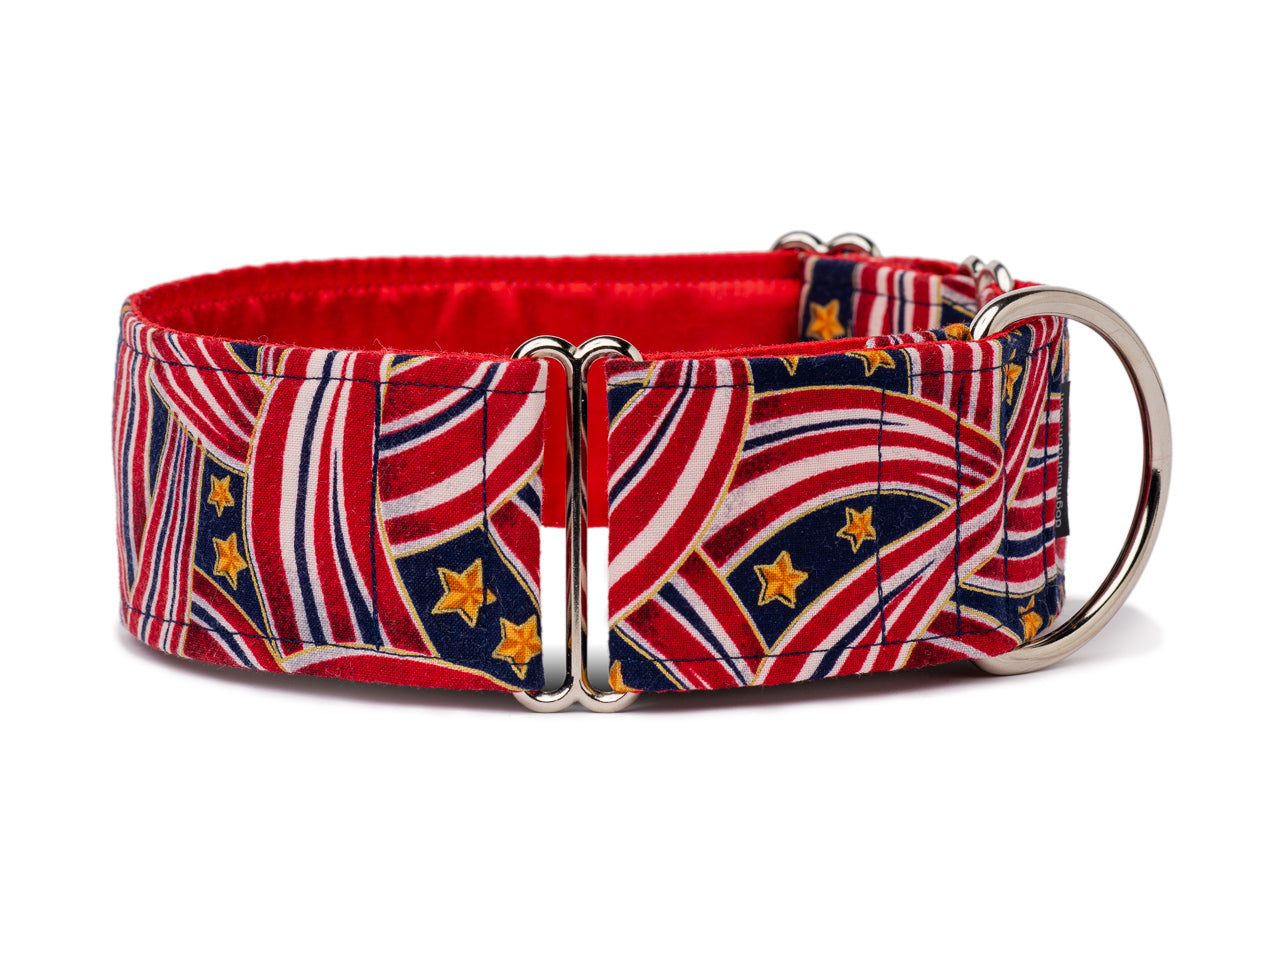 Perfect for any patriotic pooch, this red, white, and blue collar is a stylish way for your pup to show American spirit!